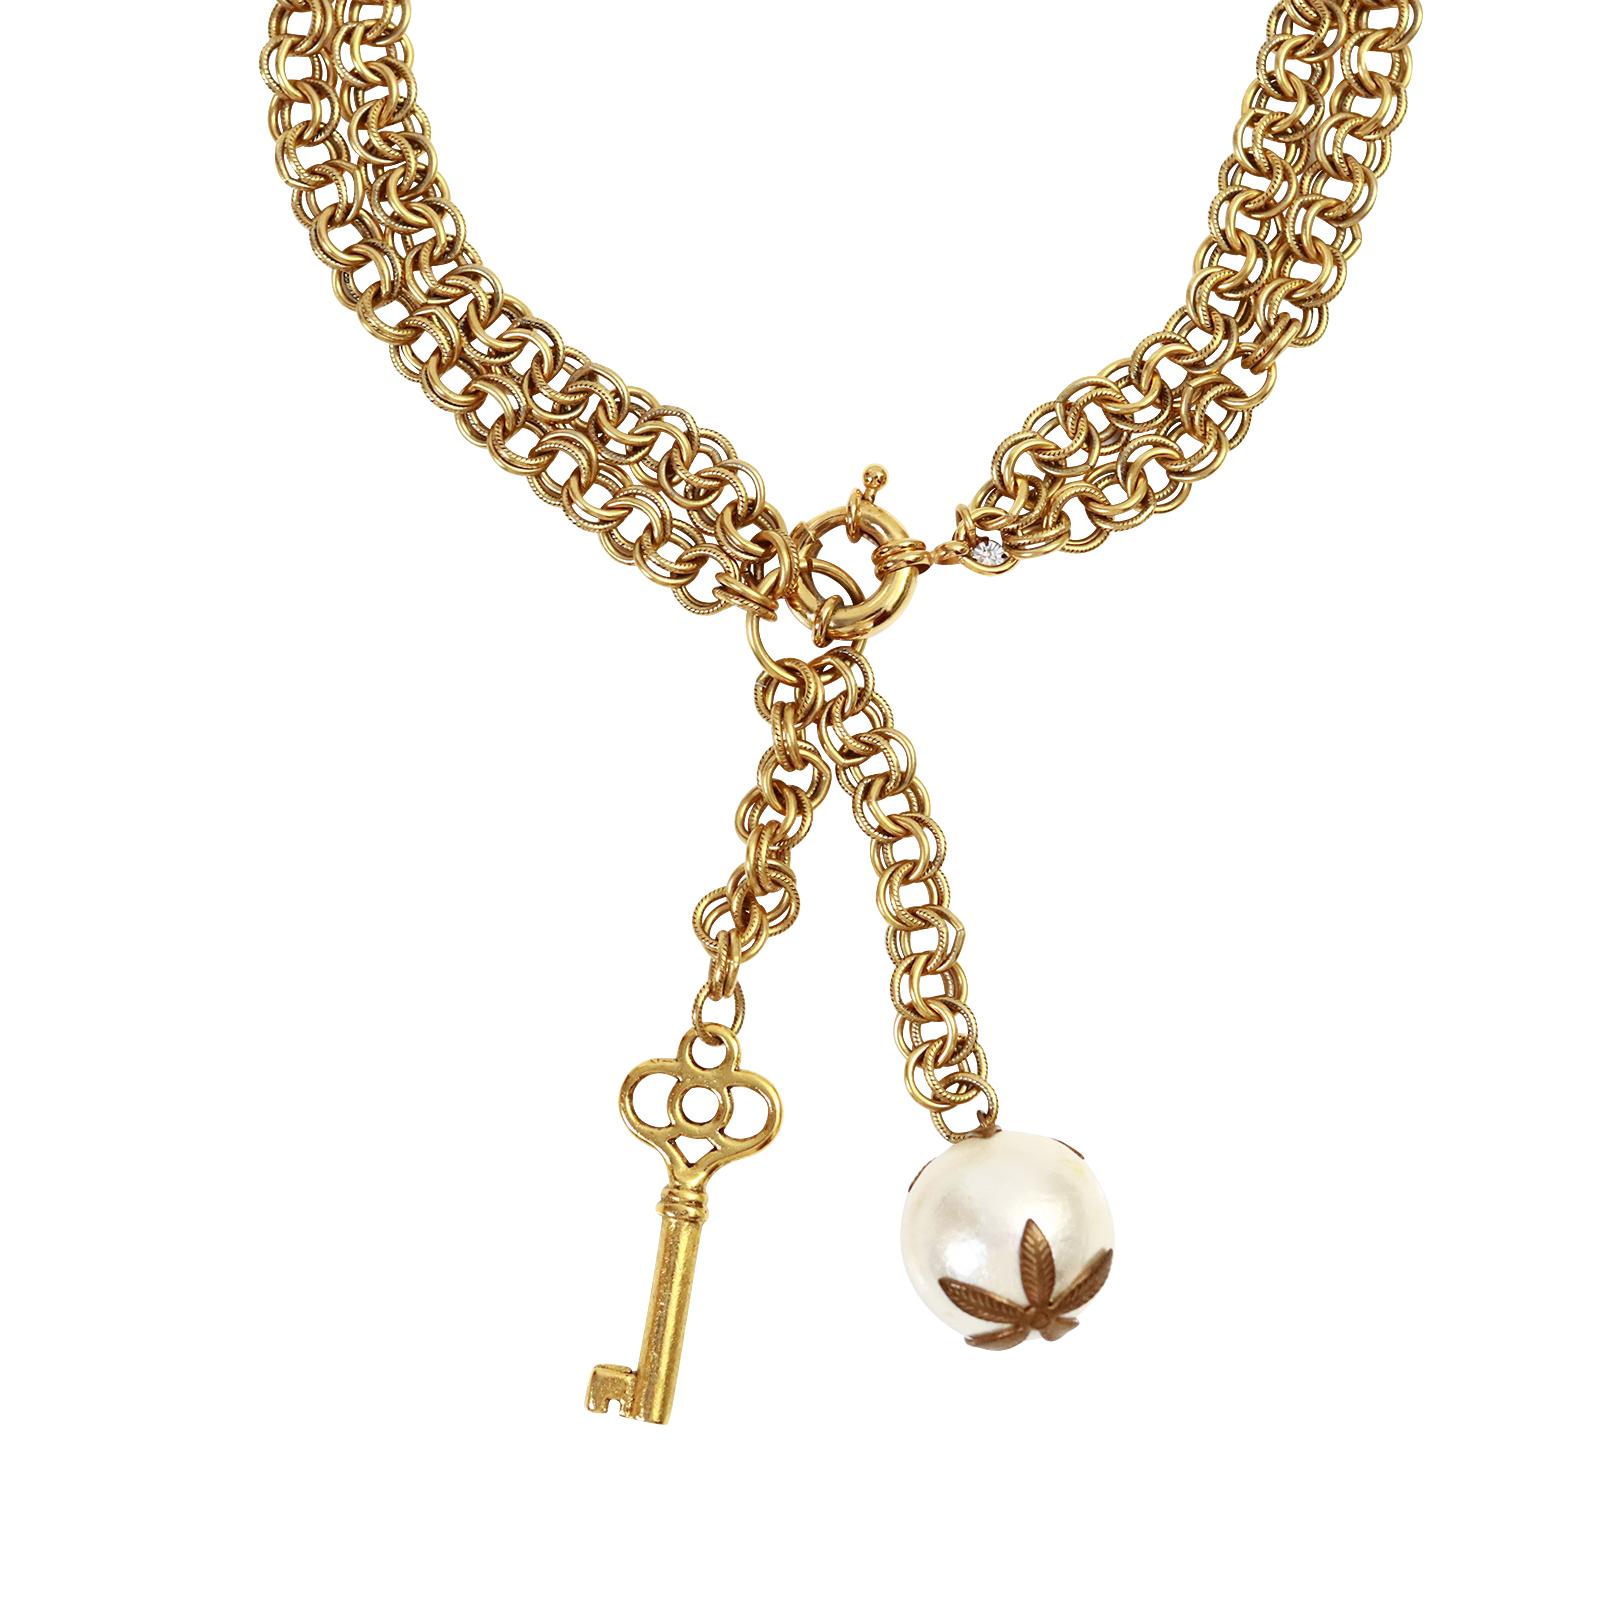 Vintage Gold Tone Lariat Drop Key and Faux Pearl Necklace Circa 1980's In Good Condition For Sale In New York, NY